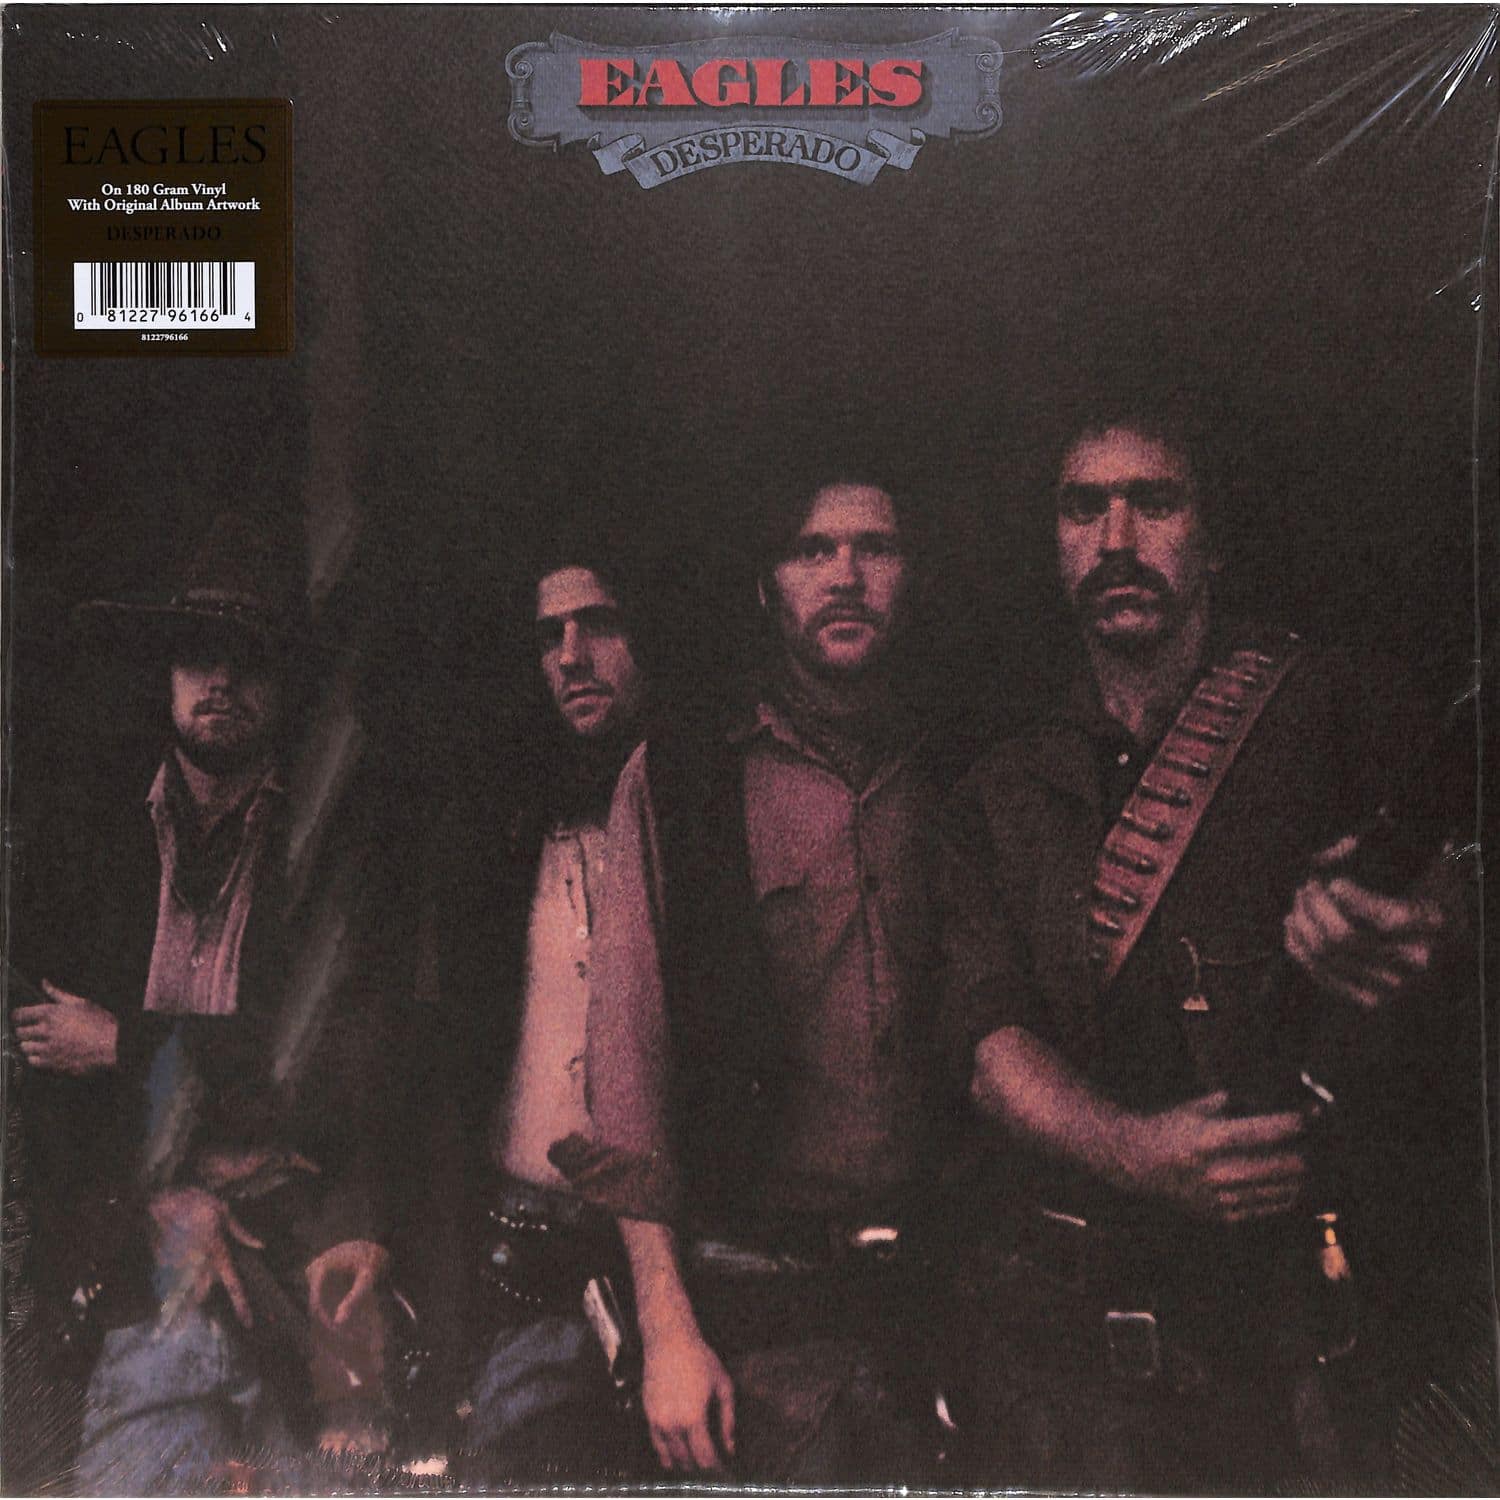 The Eagles - Live At The Forum 76 (Vinyl)